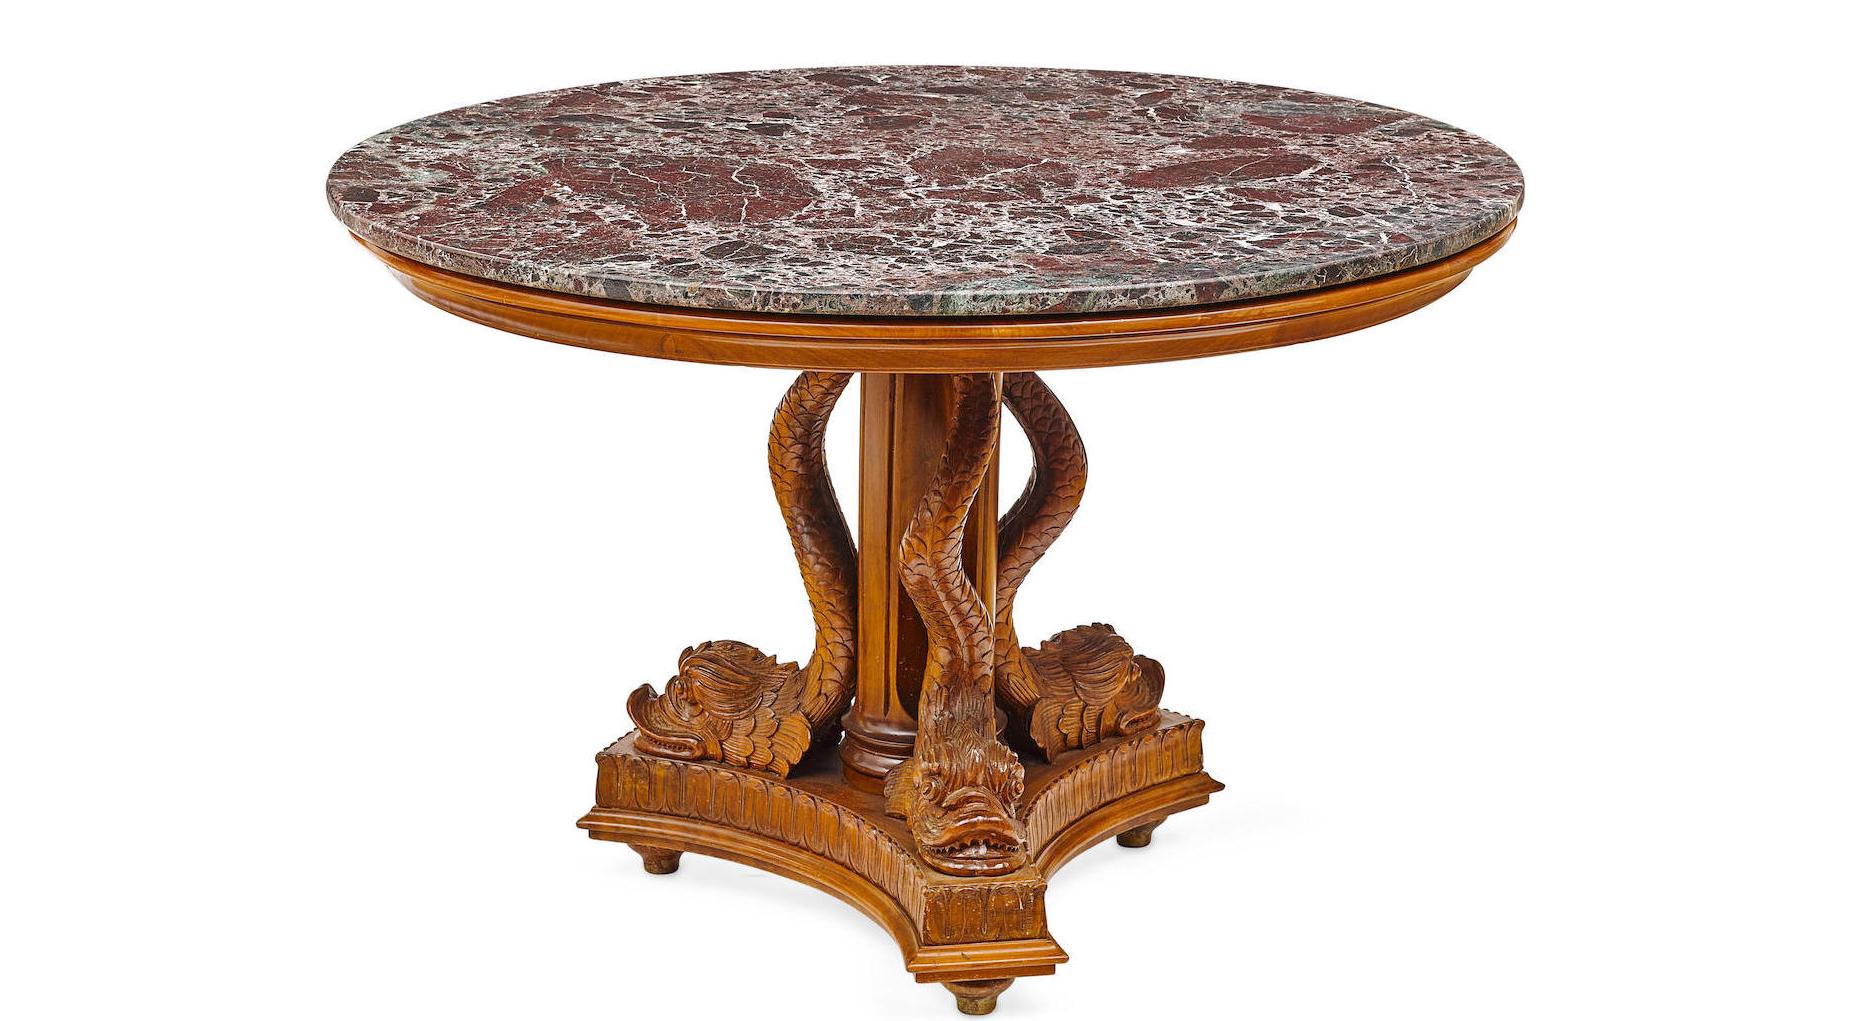 Neoclassical Round Pedestal Table with Dolphins, Early 20th Century For Sale